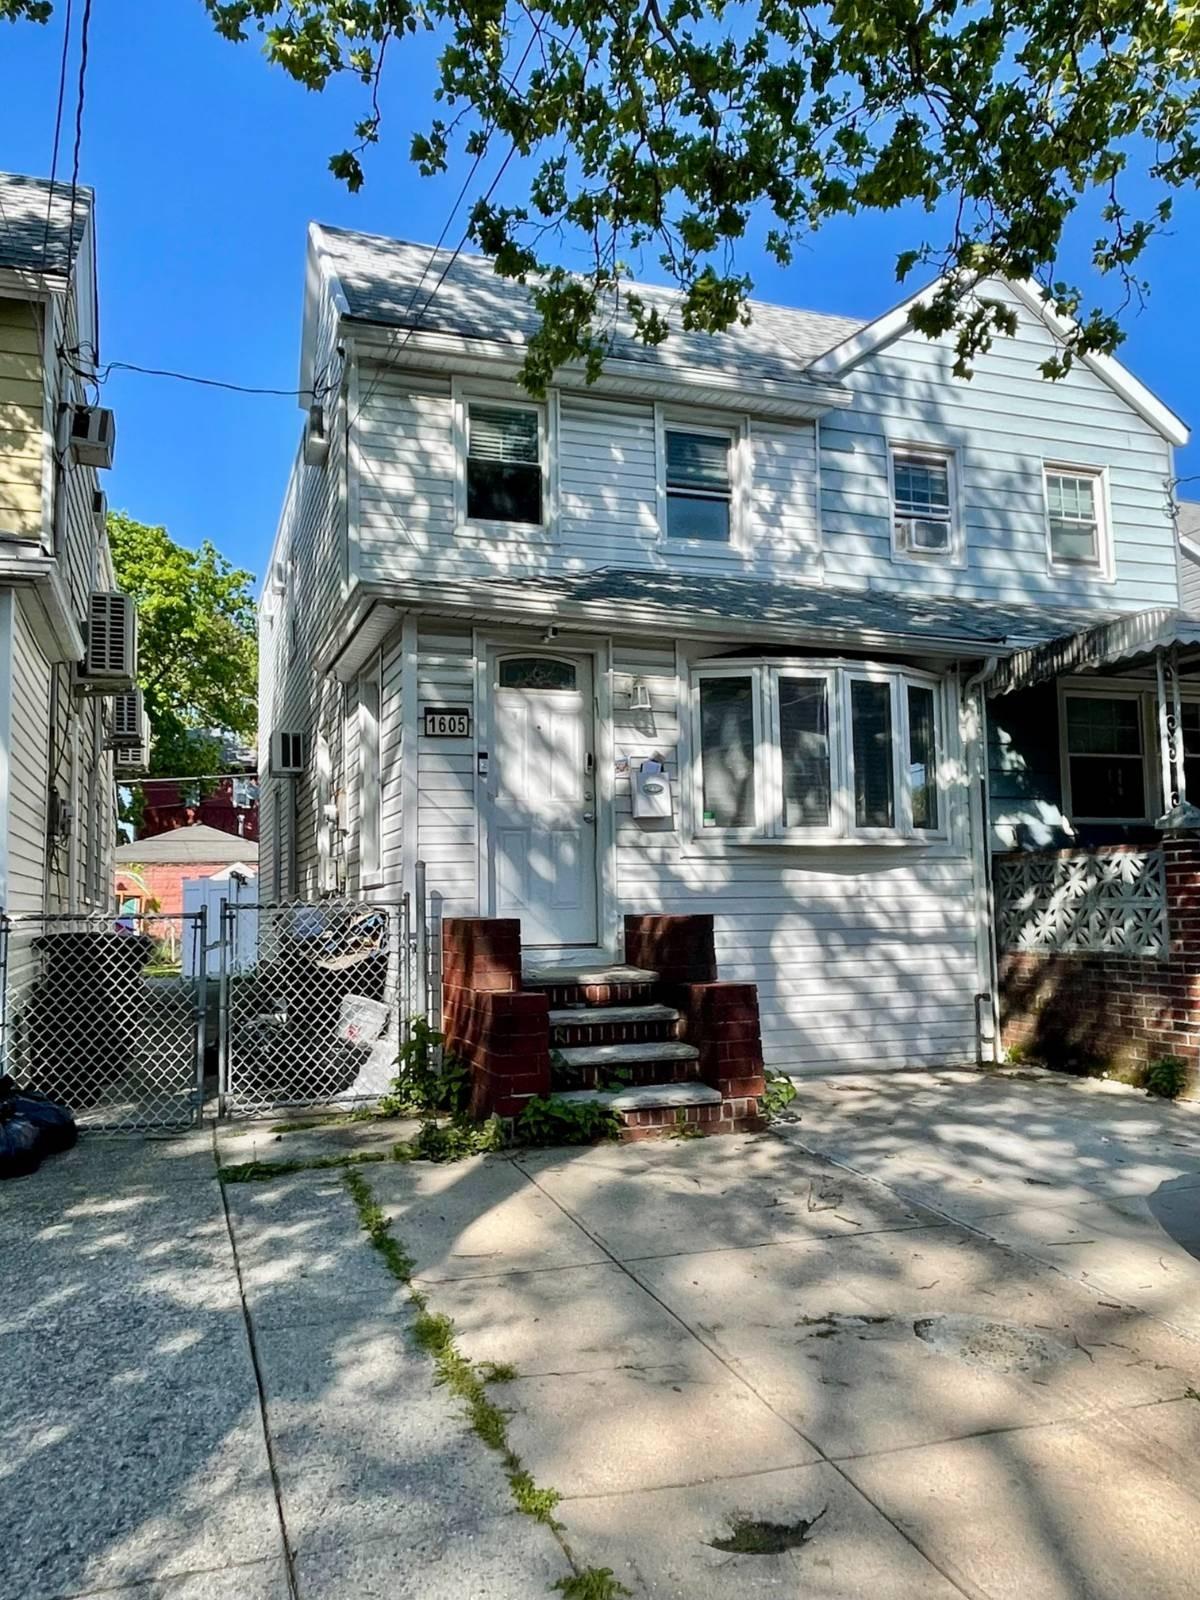 Property Image for 1605 East 34th Street